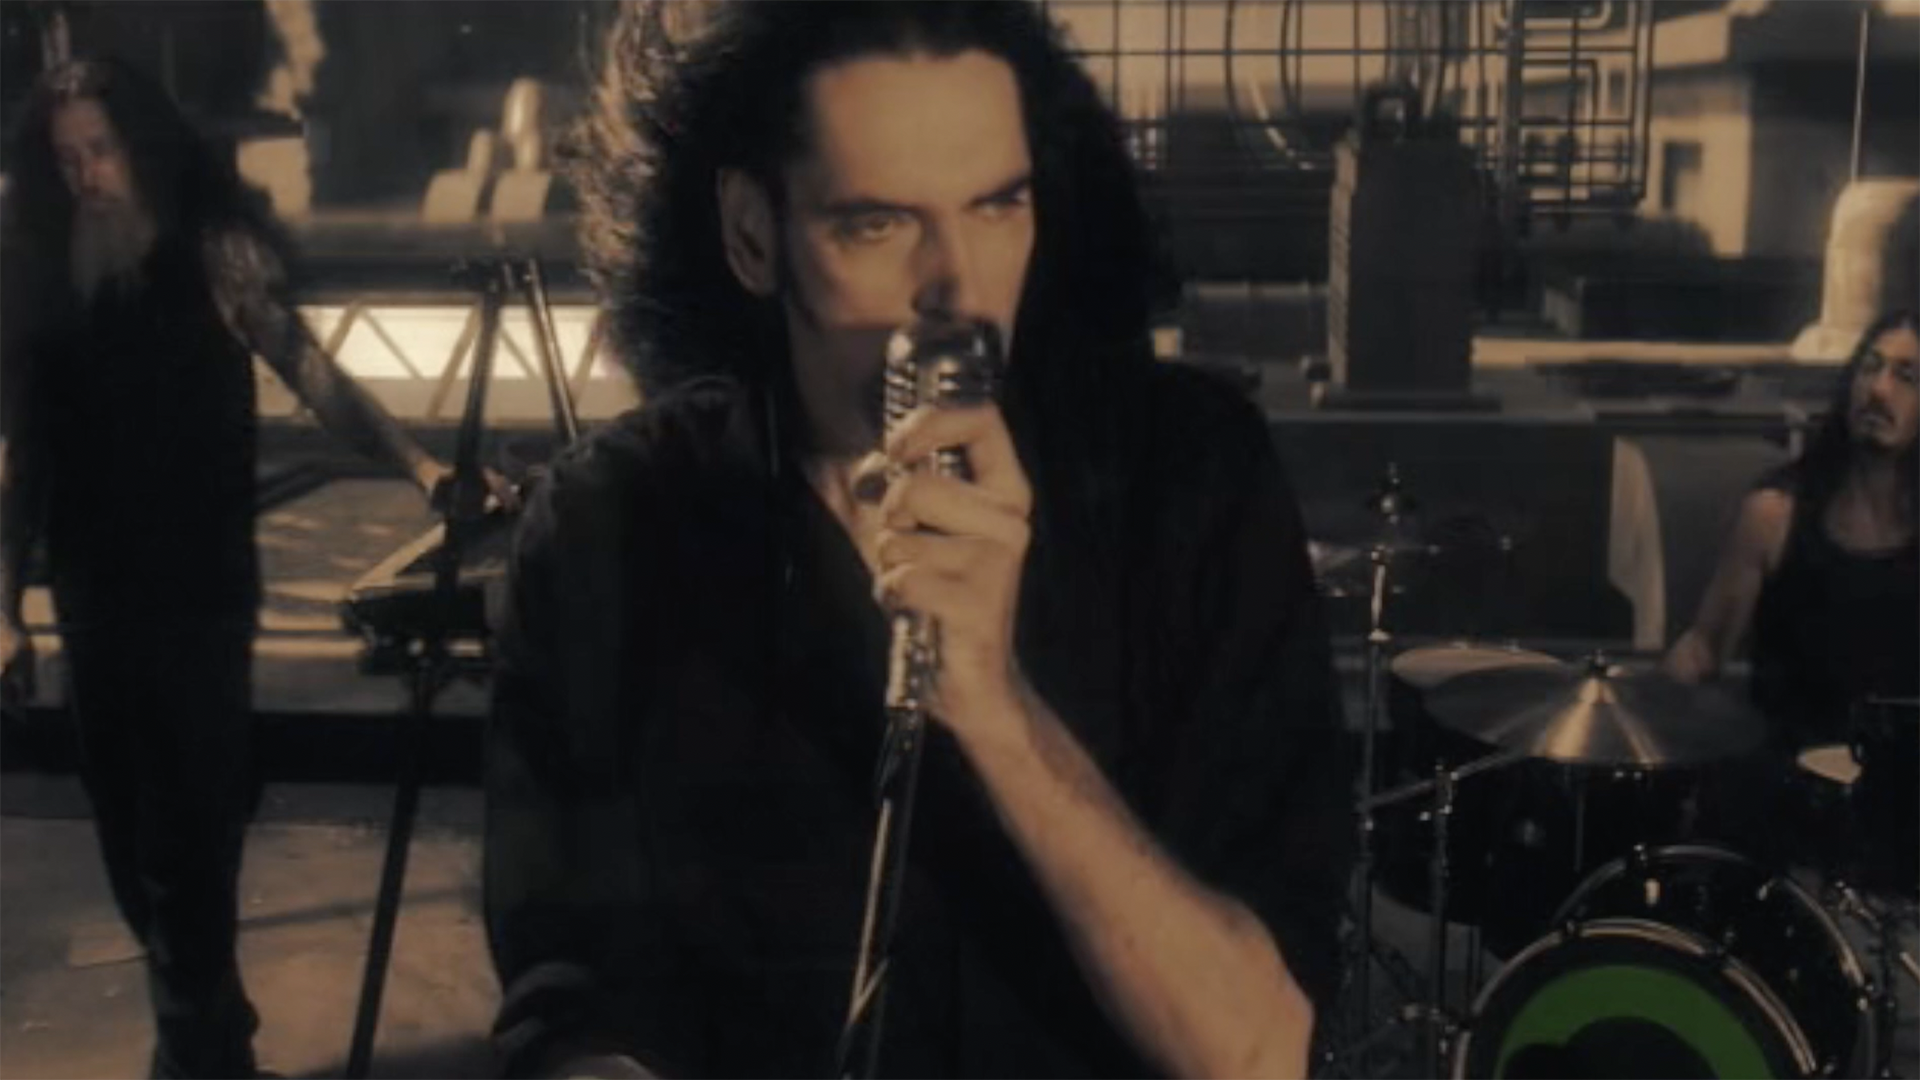 TYPE O NEGATIVE - RELEASE MUSIC VIDEO FOR "LOVE YOU TO DEATH"